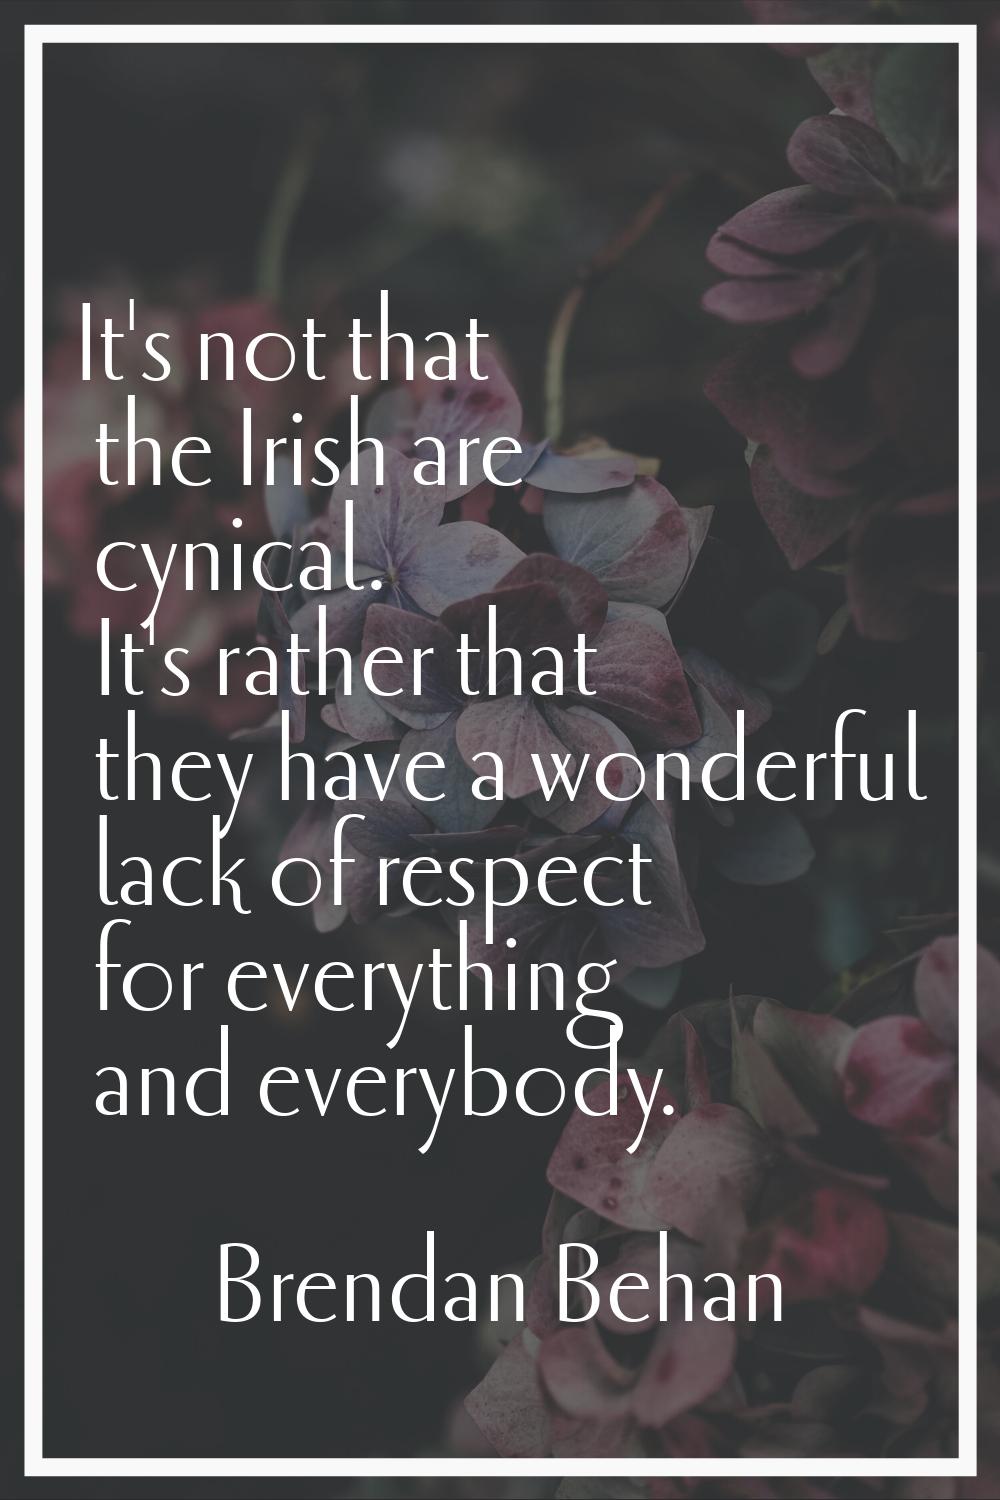 It's not that the Irish are cynical. It's rather that they have a wonderful lack of respect for eve